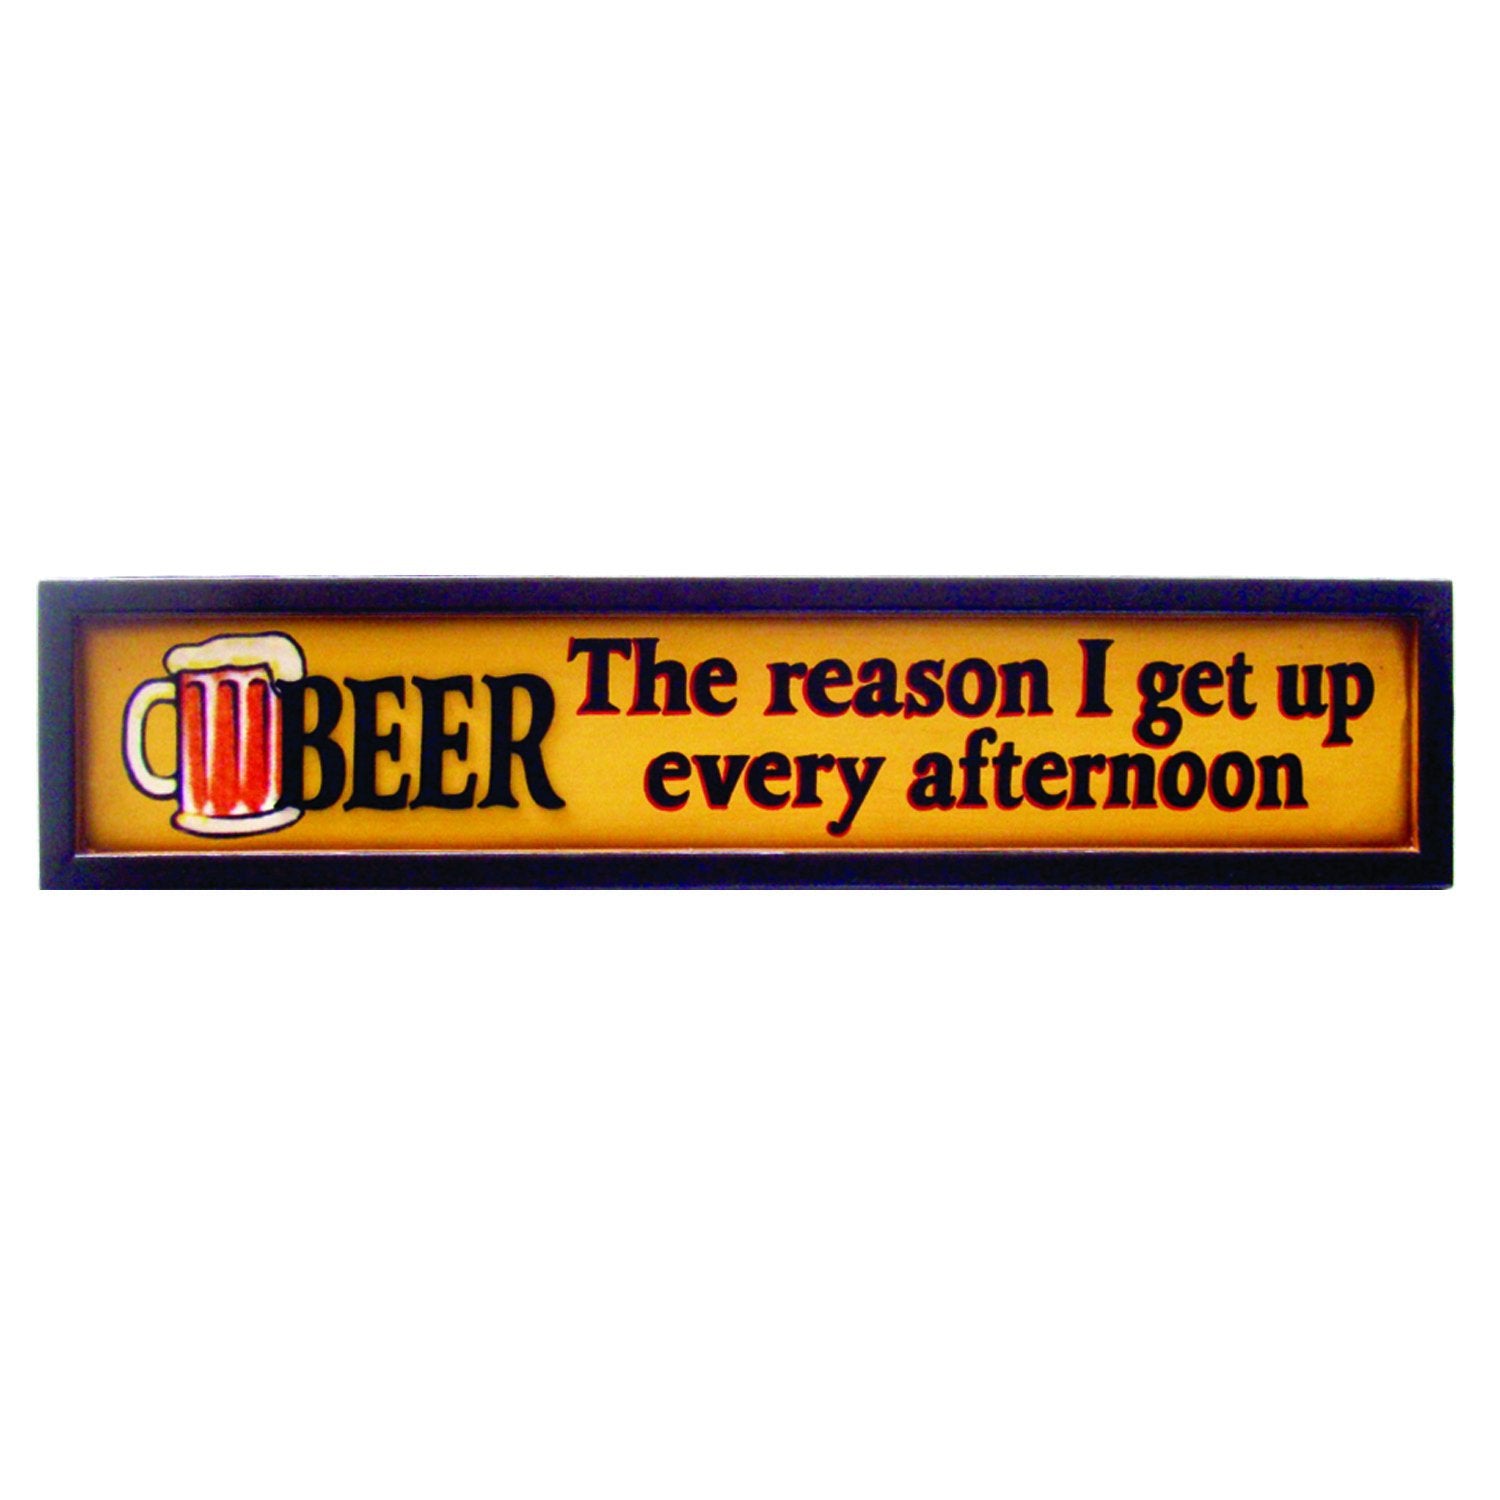 RAM Game Room “Beer Afternoon” Wall Art Sign